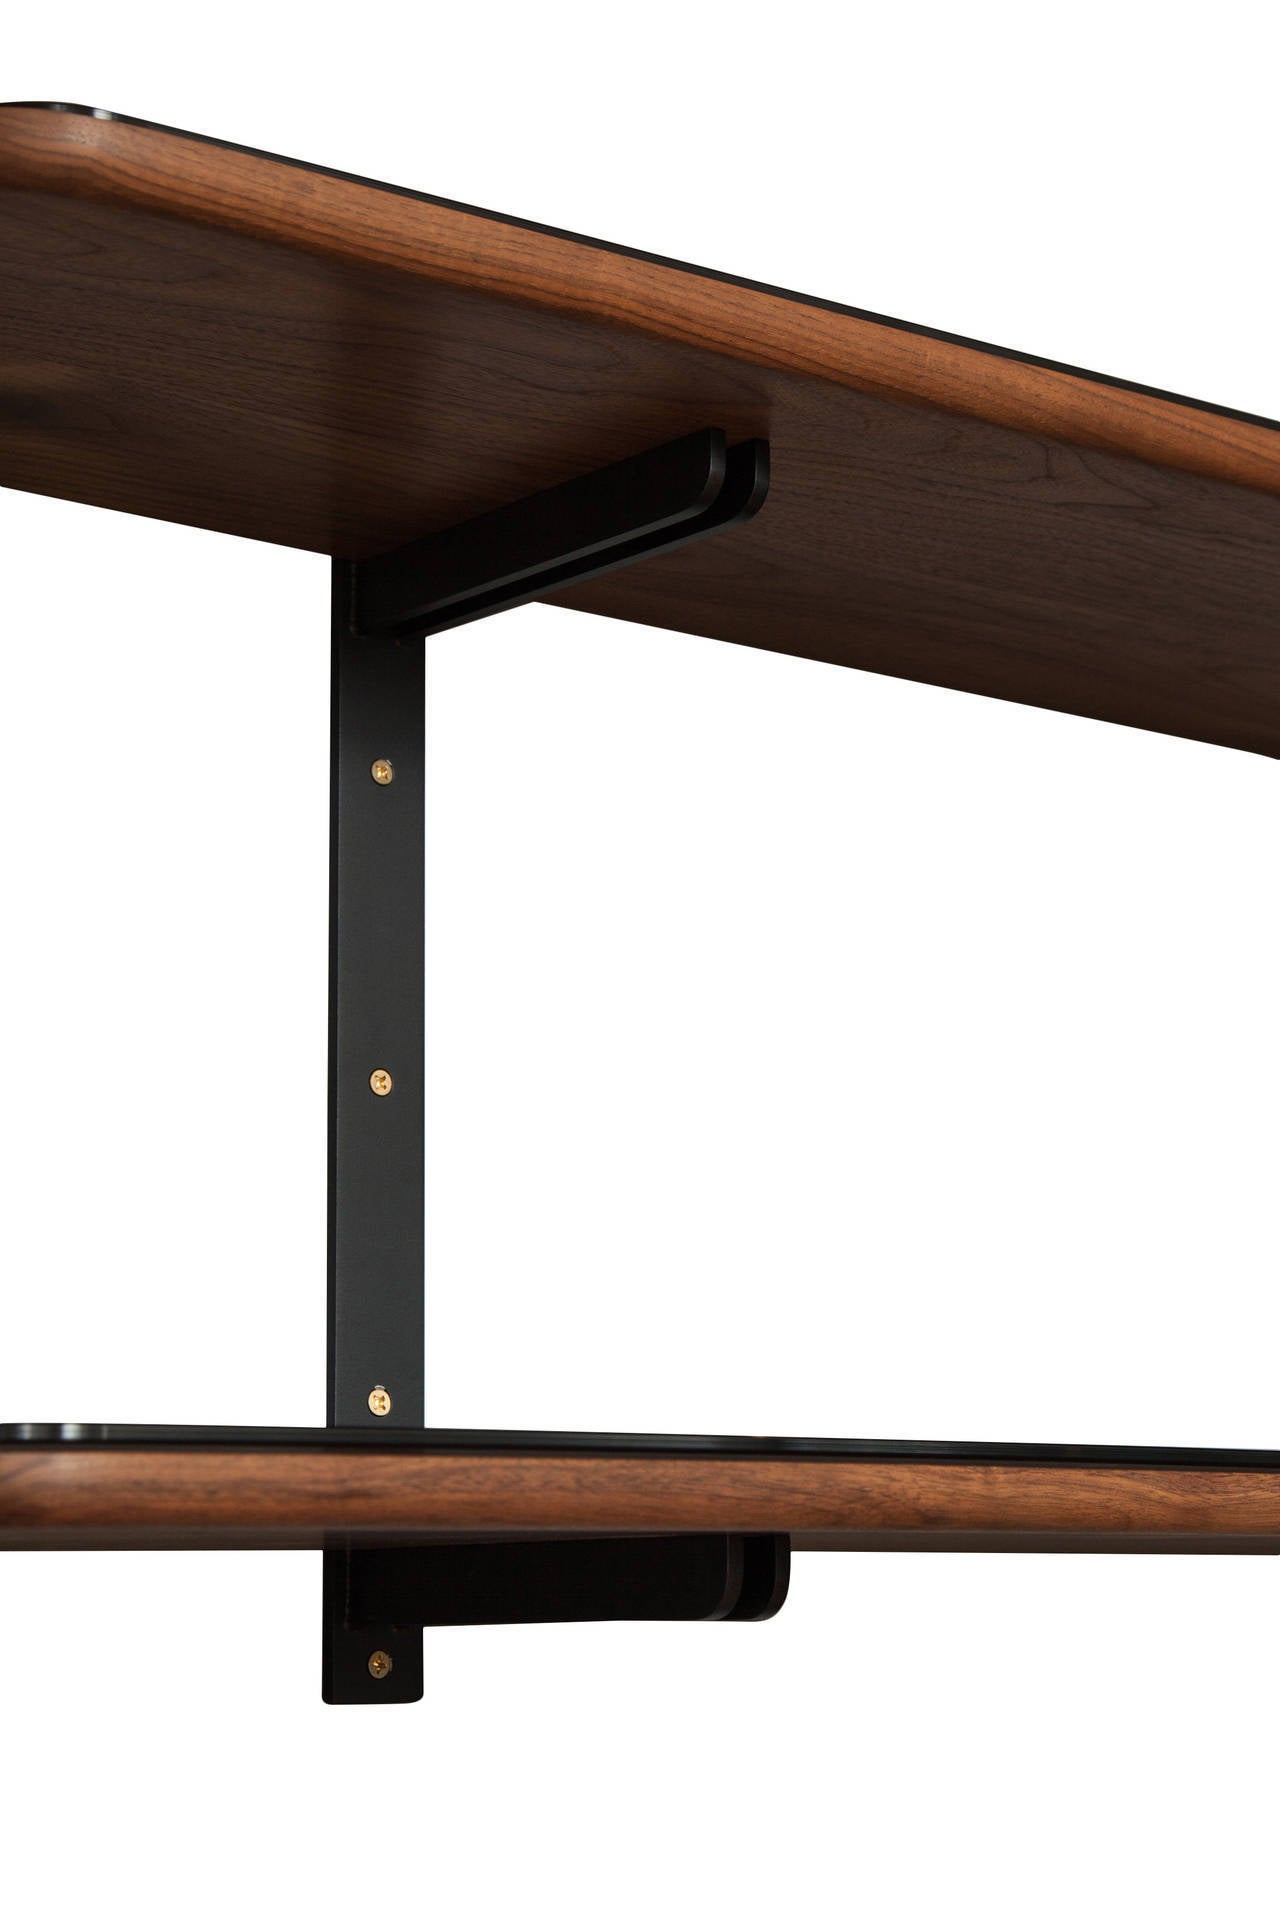 Stillmade Black Walnut and Steel Wall Shelf System In Excellent Condition For Sale In New York, NY